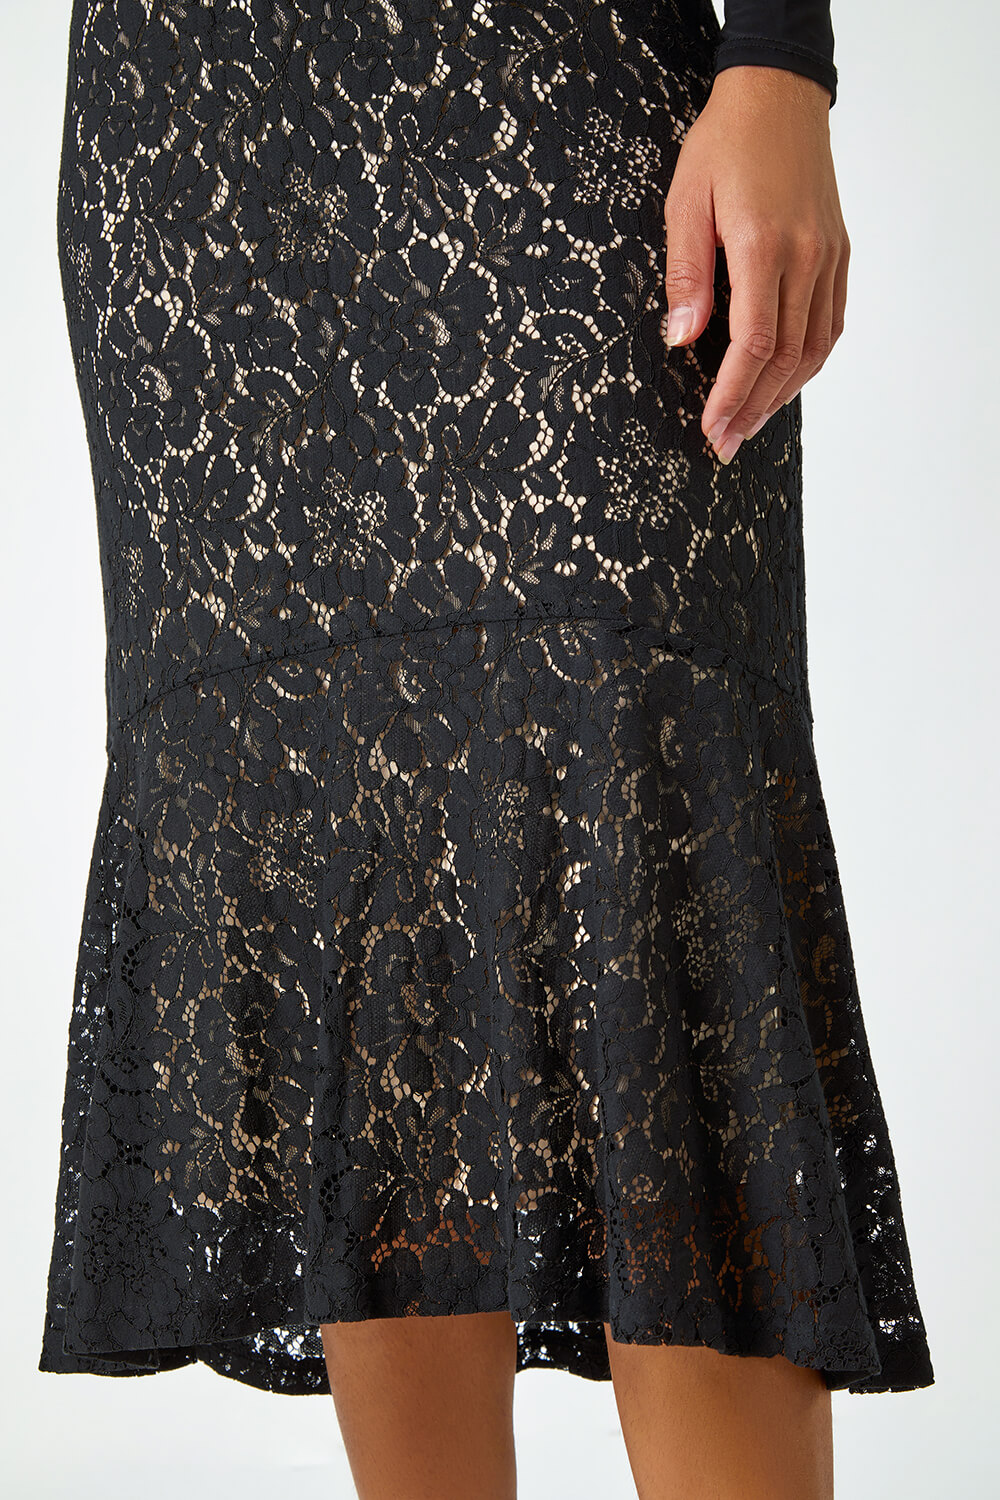 Black Cotton Blend Lace Stretch Skirt , Image 5 of 5